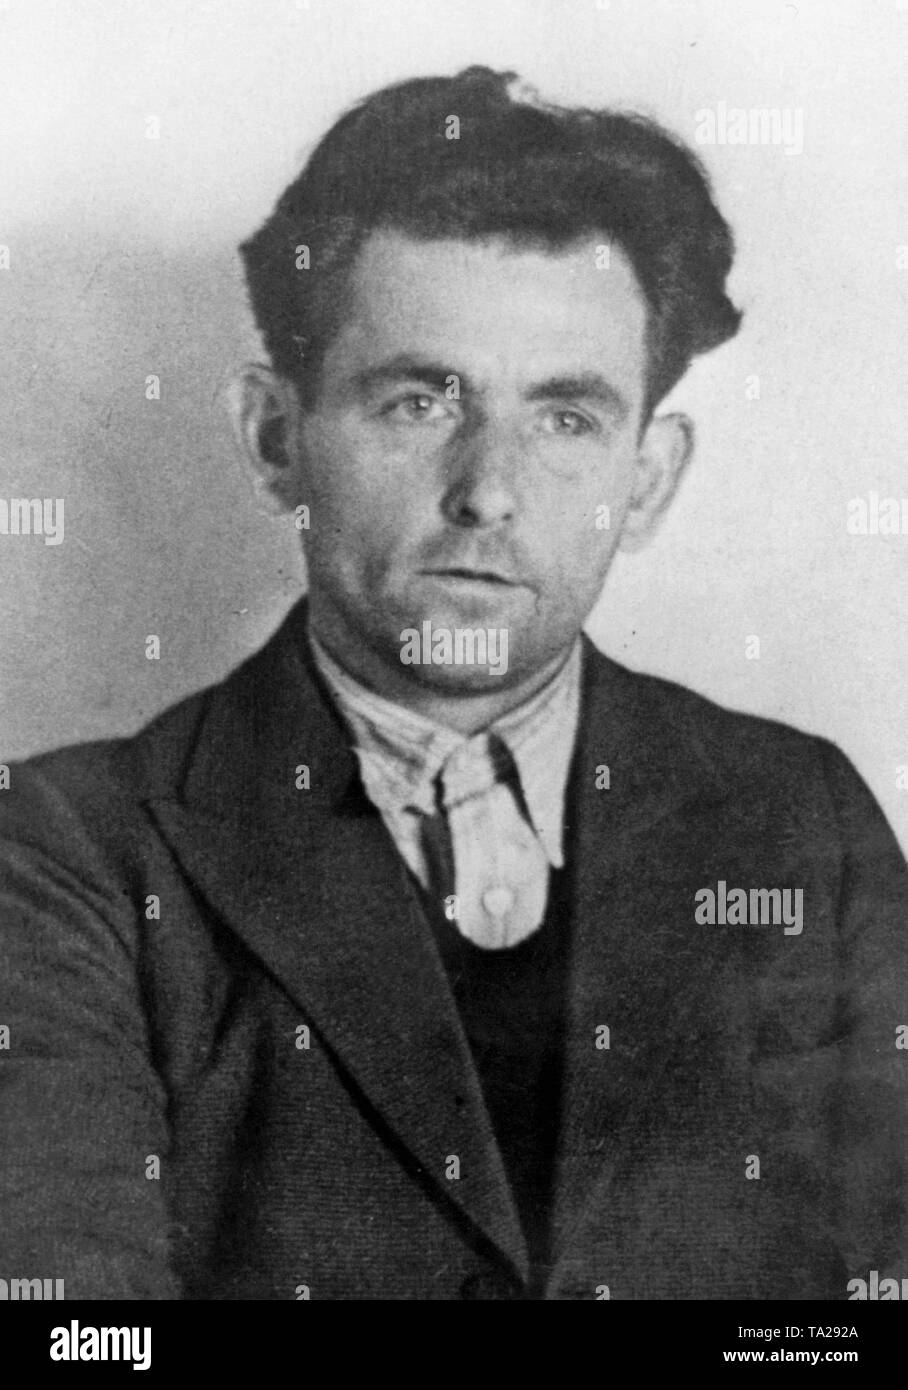 Portrait of the journeyman carpenter Johann Georg Elser, taken by the Gestapo in November 1939 in the Sachsenhausen concentration camp. Elser, who was born in 1903 in Hermaringen, Wuerttemberg, committed an attempt on Adolf Hitler in the Munich Buergerbraeukeller on November 8, 1939. Hitler narrowly escaped and Georg Elser was shot after nearly five years of imprisonment in a concentration camp in Dachau on April 9, 1945. Stock Photo